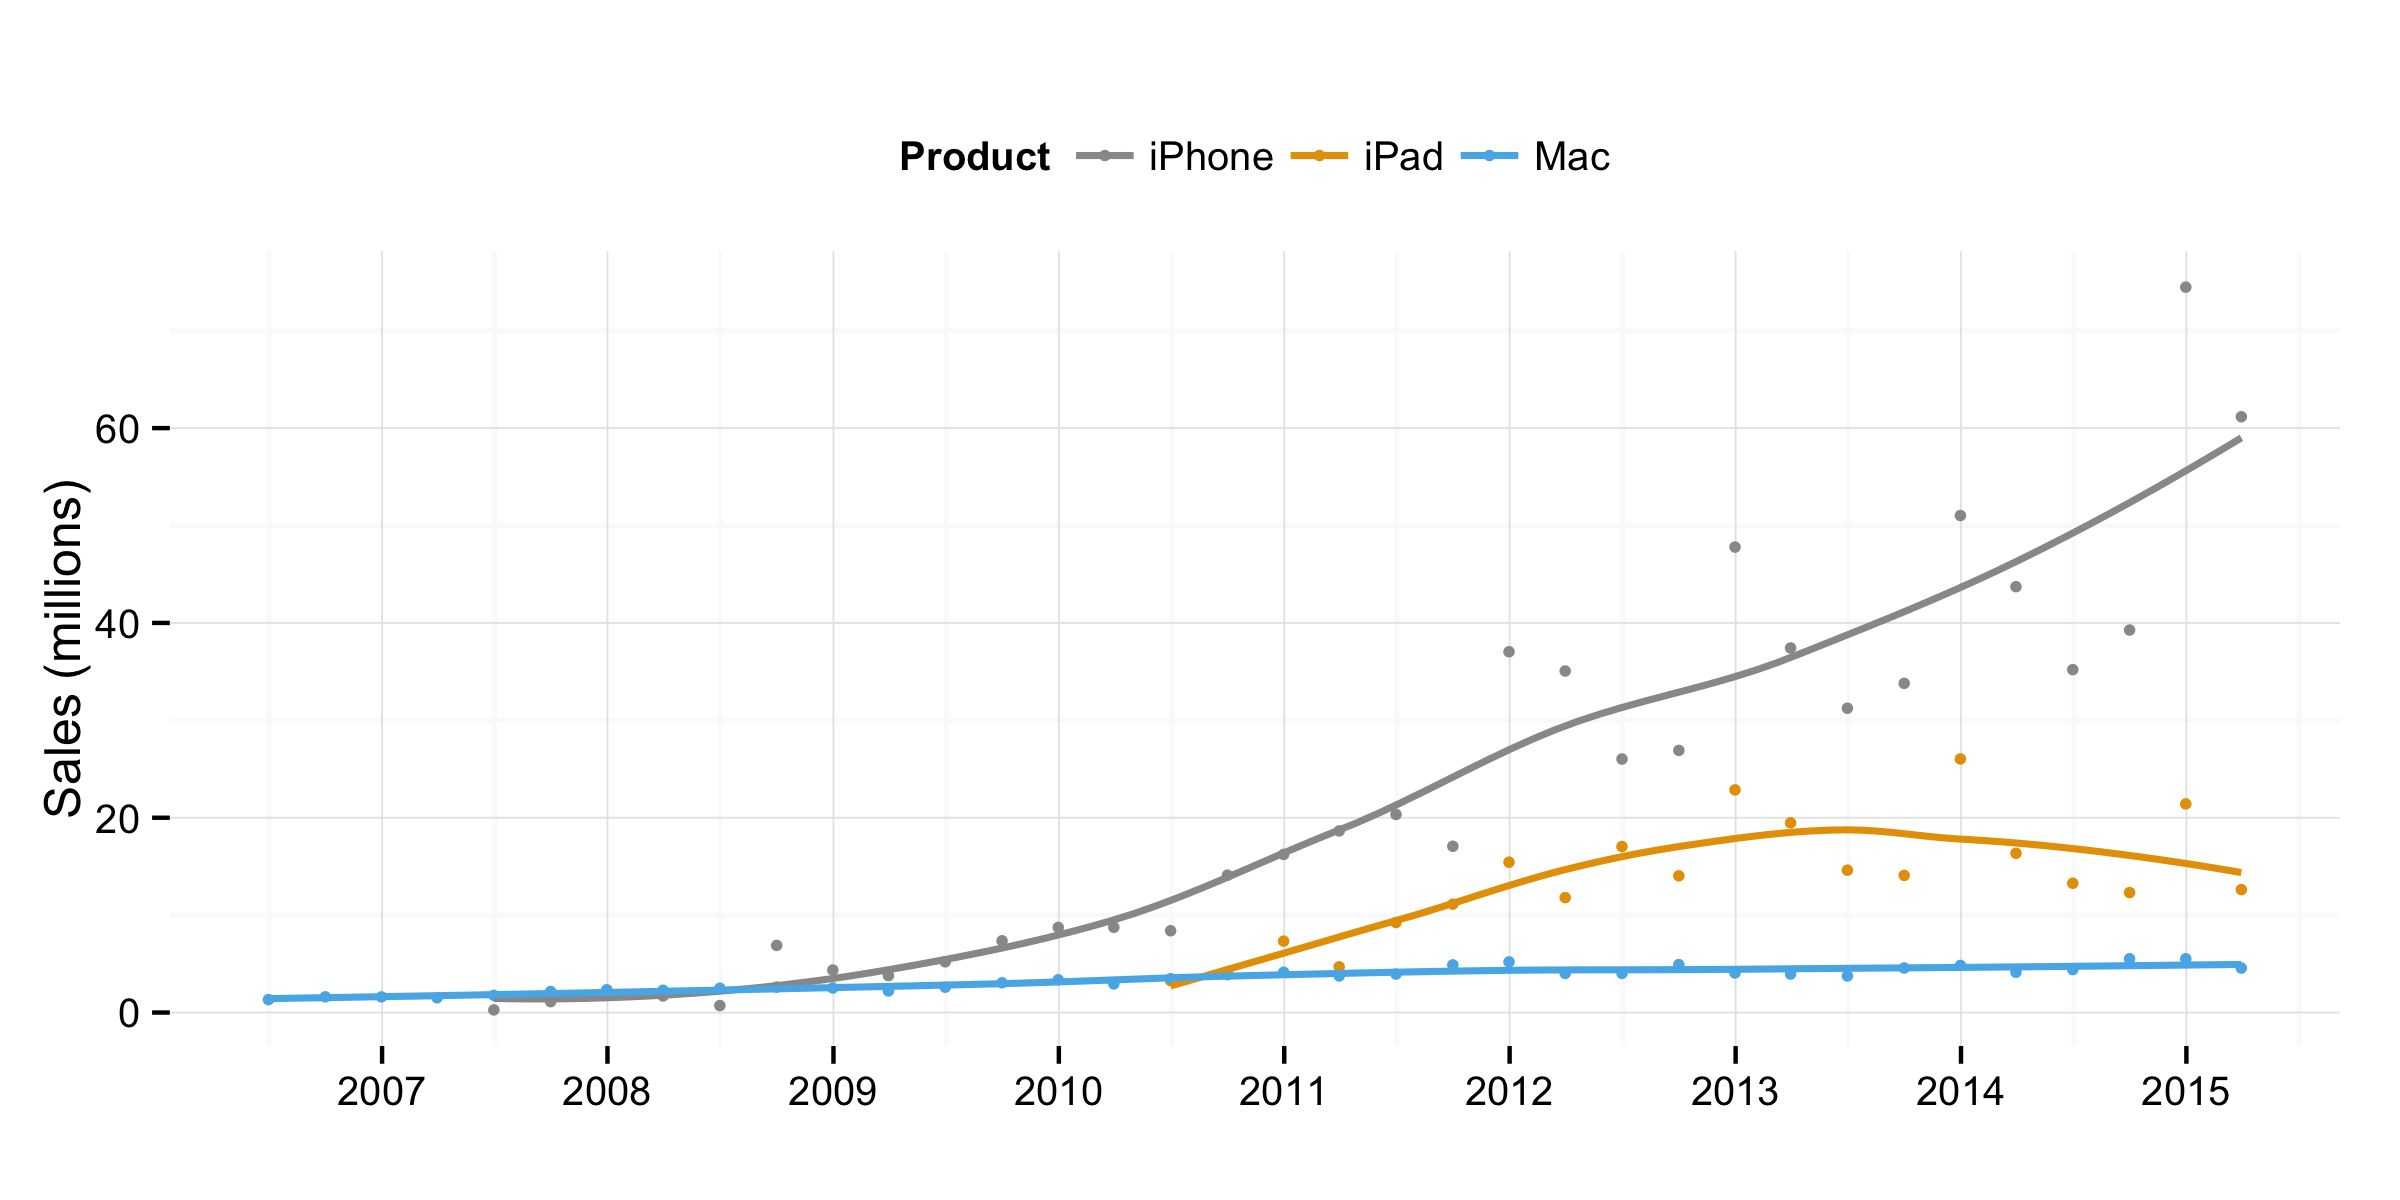 Quarterly sales data for Apple Macs, iPhones, and iPads by Kieran Healy.